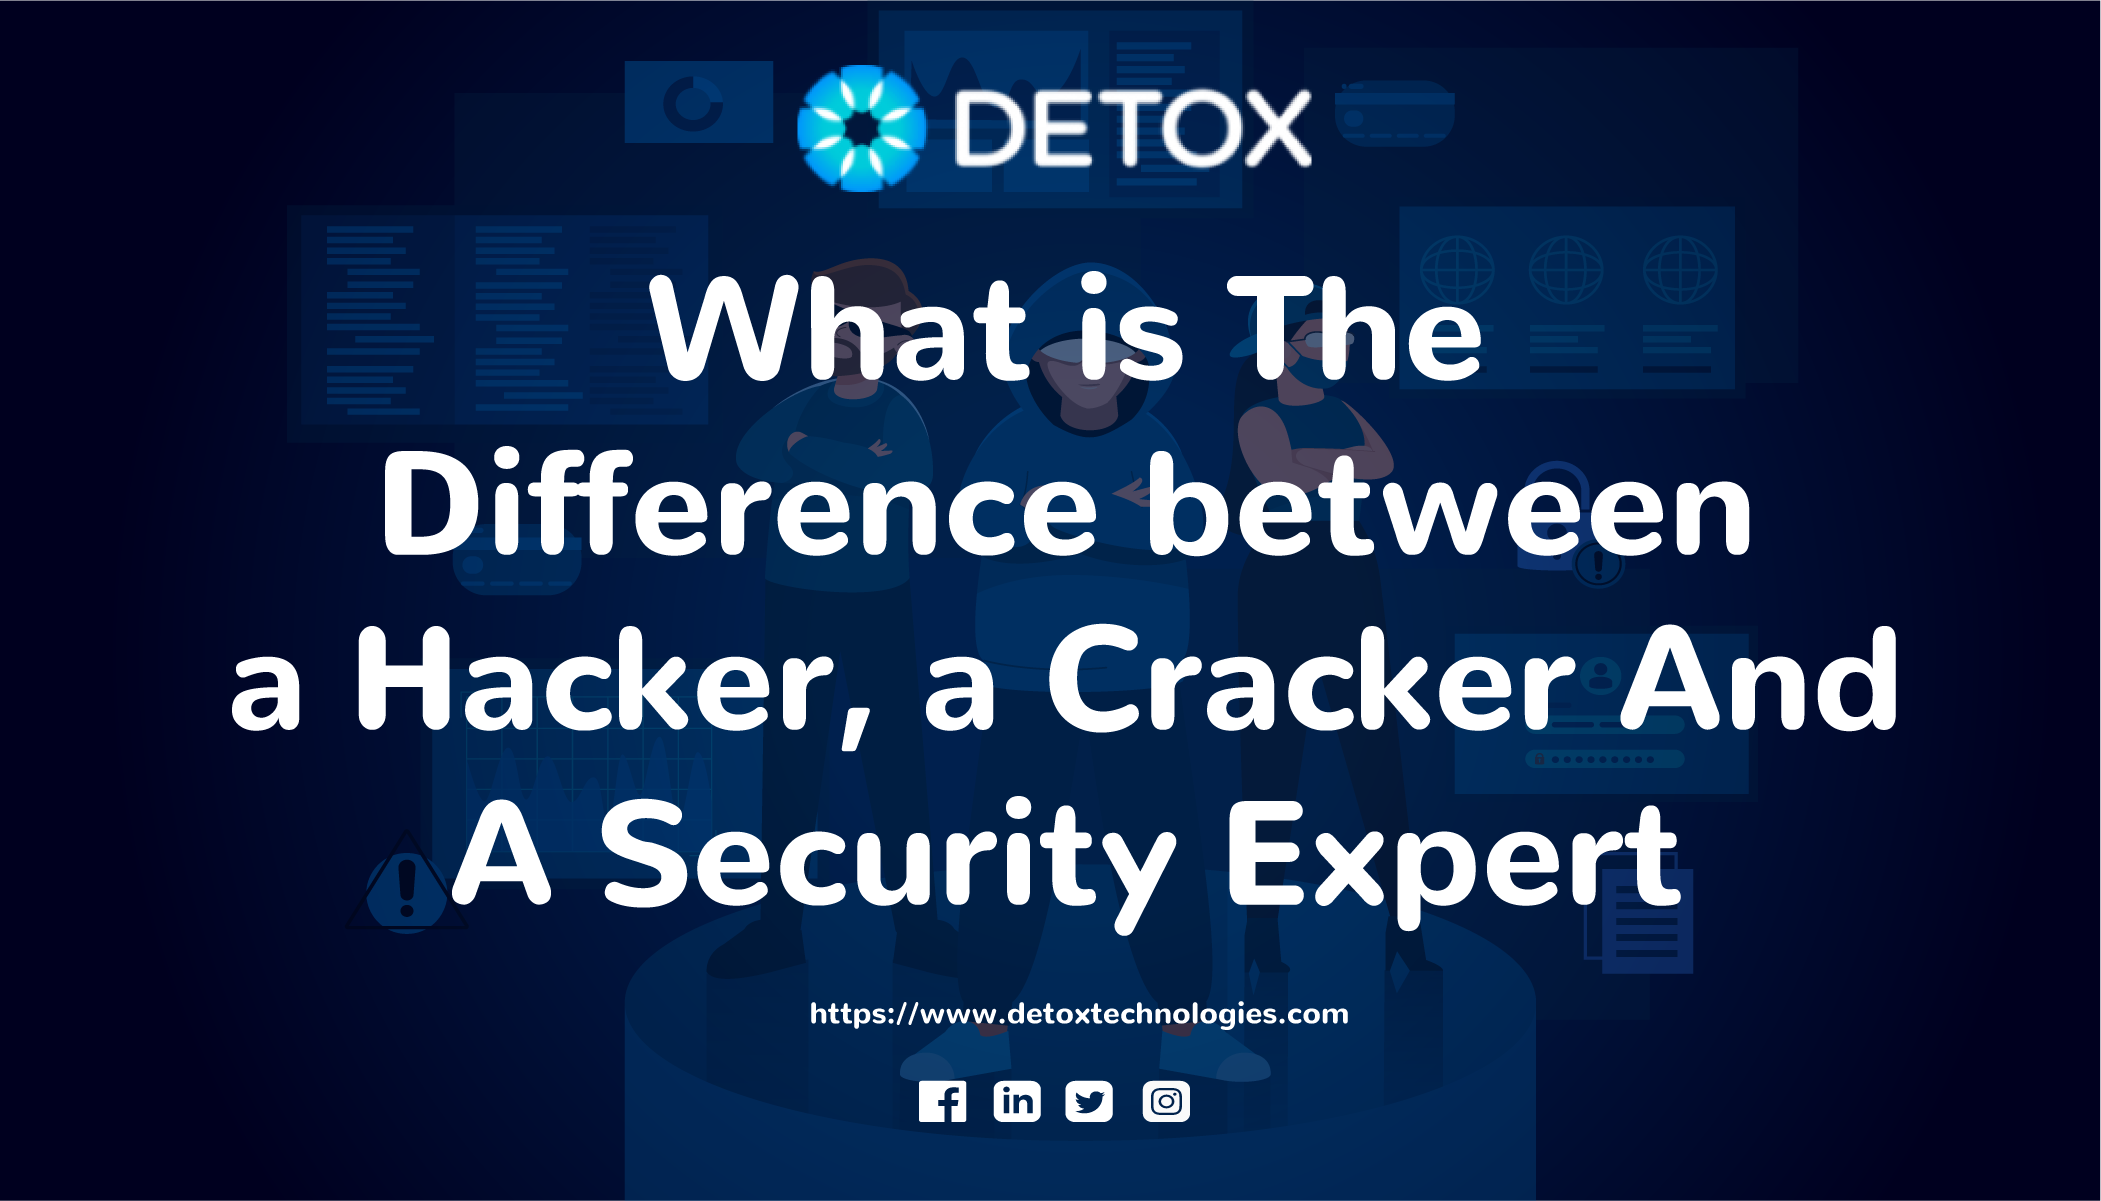 What is The Difference between a Hacker a Cracker And A Security Expert